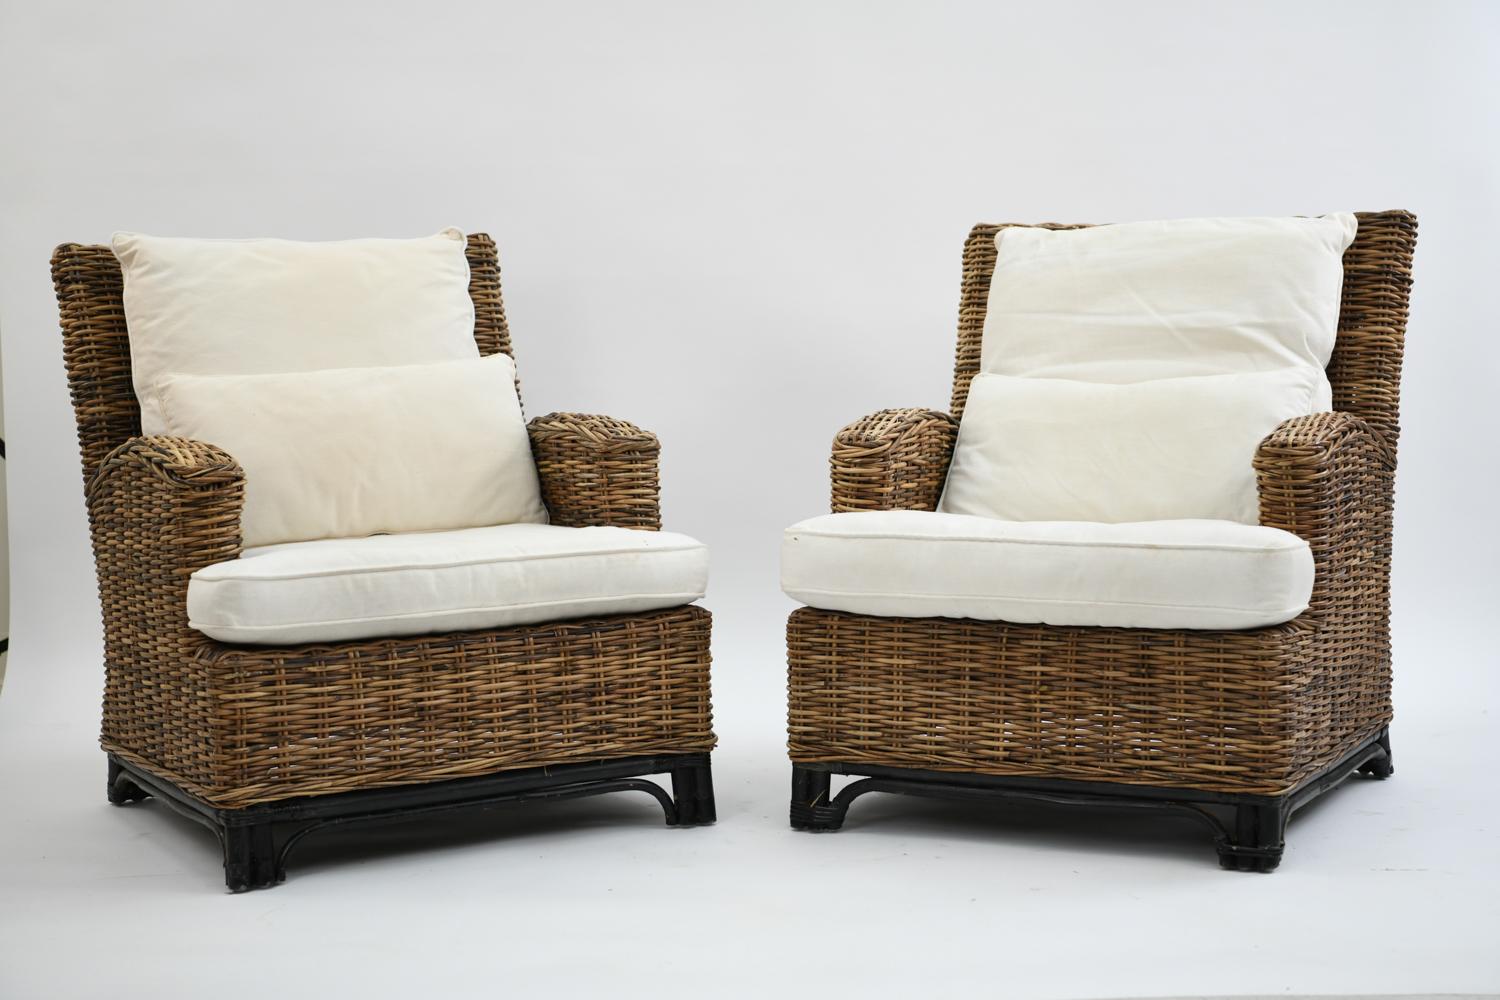 This fabulous pair of Danish wicker easy chairs were previously sold by Jytte Demuth, a well respected Danish interior design firm. These chairs have a refreshing, fun appearance and could be used in interior or exterior spaces.